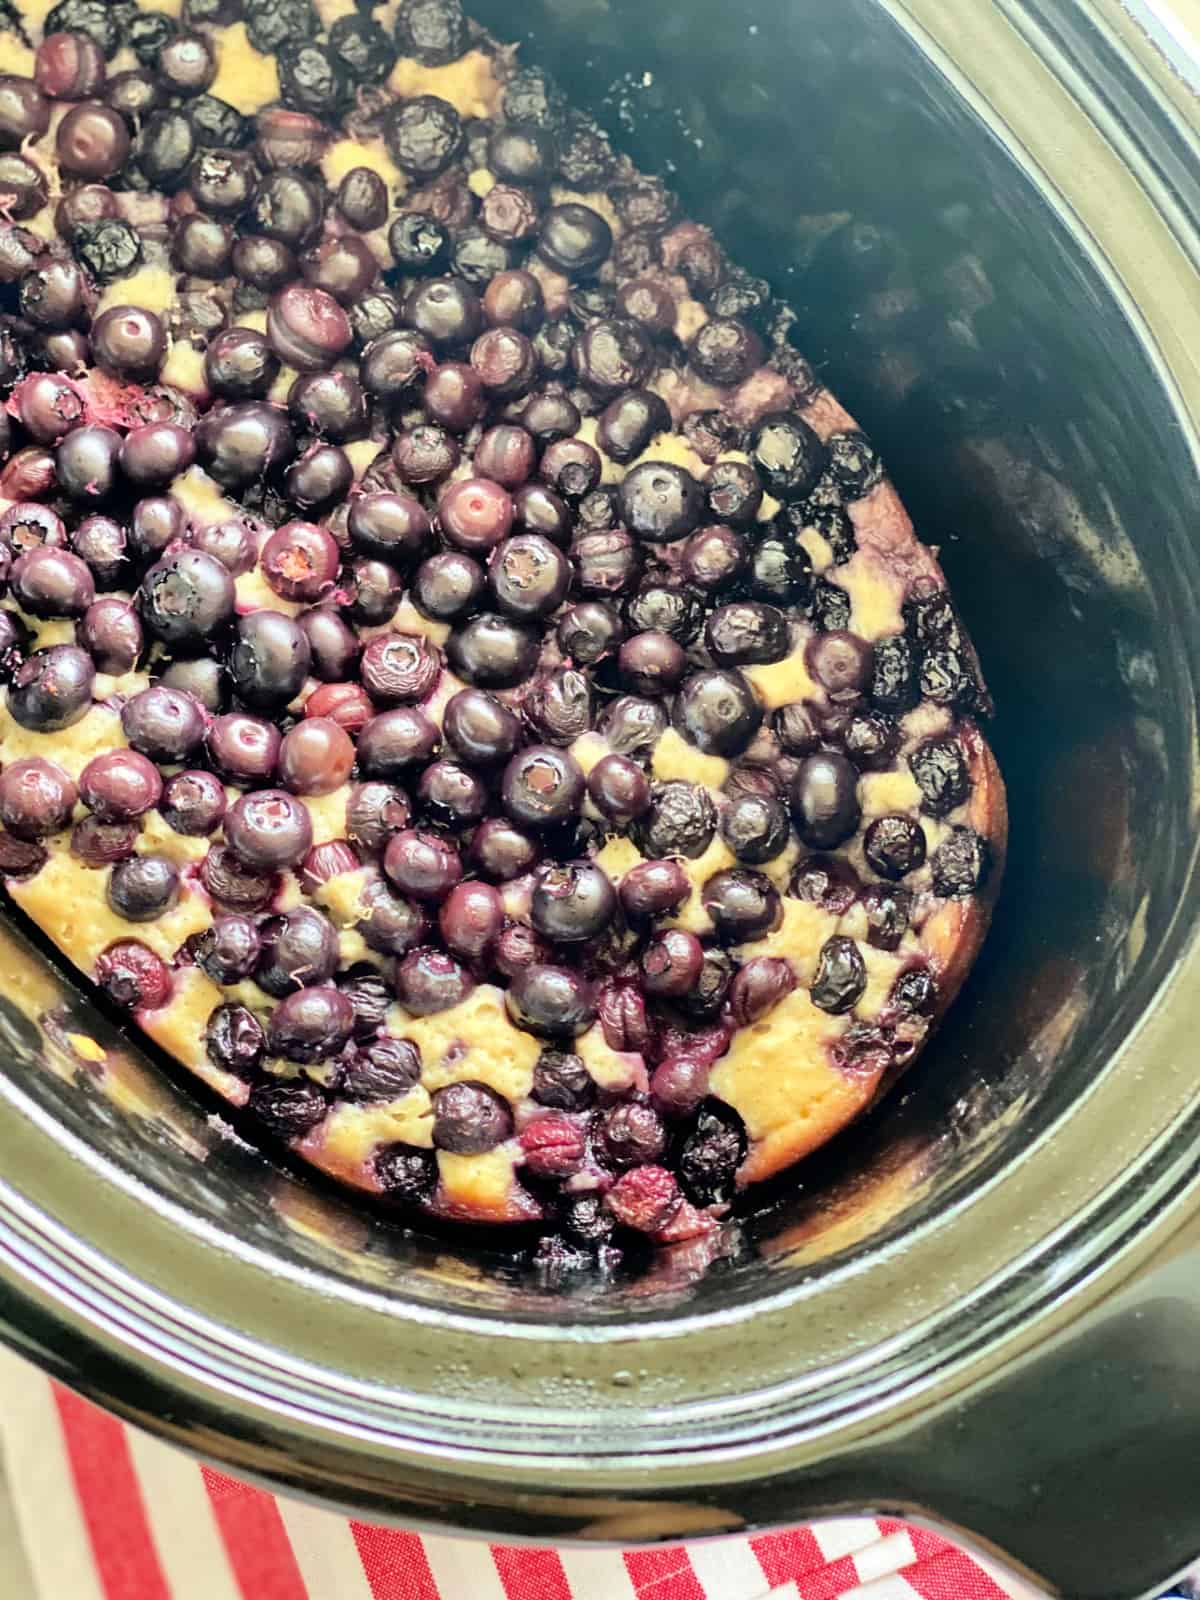 Top view of a black slow cooker filled with blueberry cake.